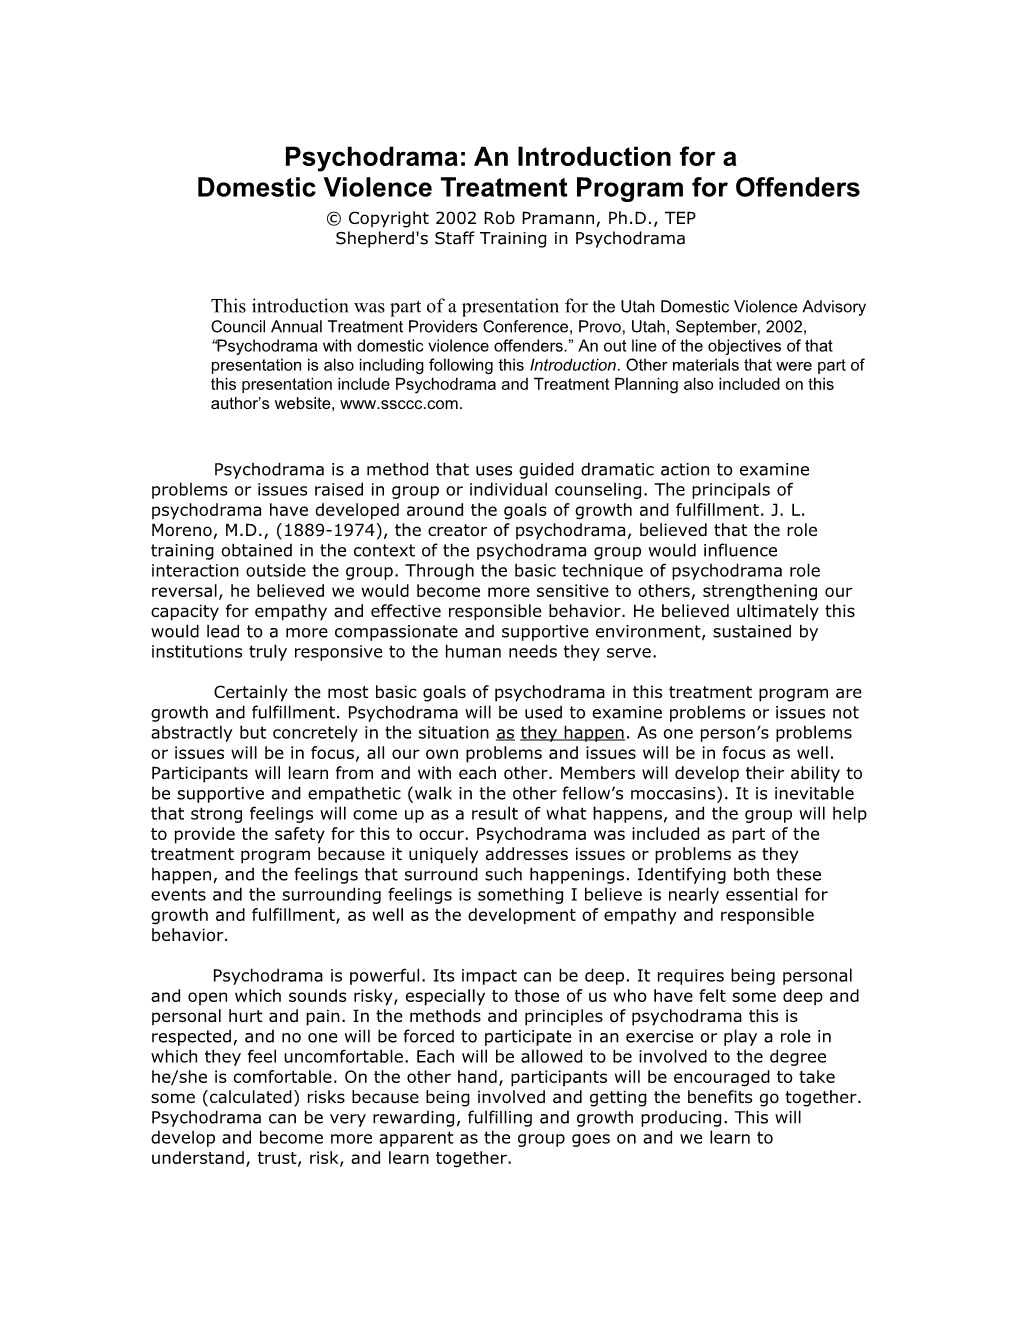 Psychodrama: an Introduction for Adomestic Violence Treatment Program for Offenders